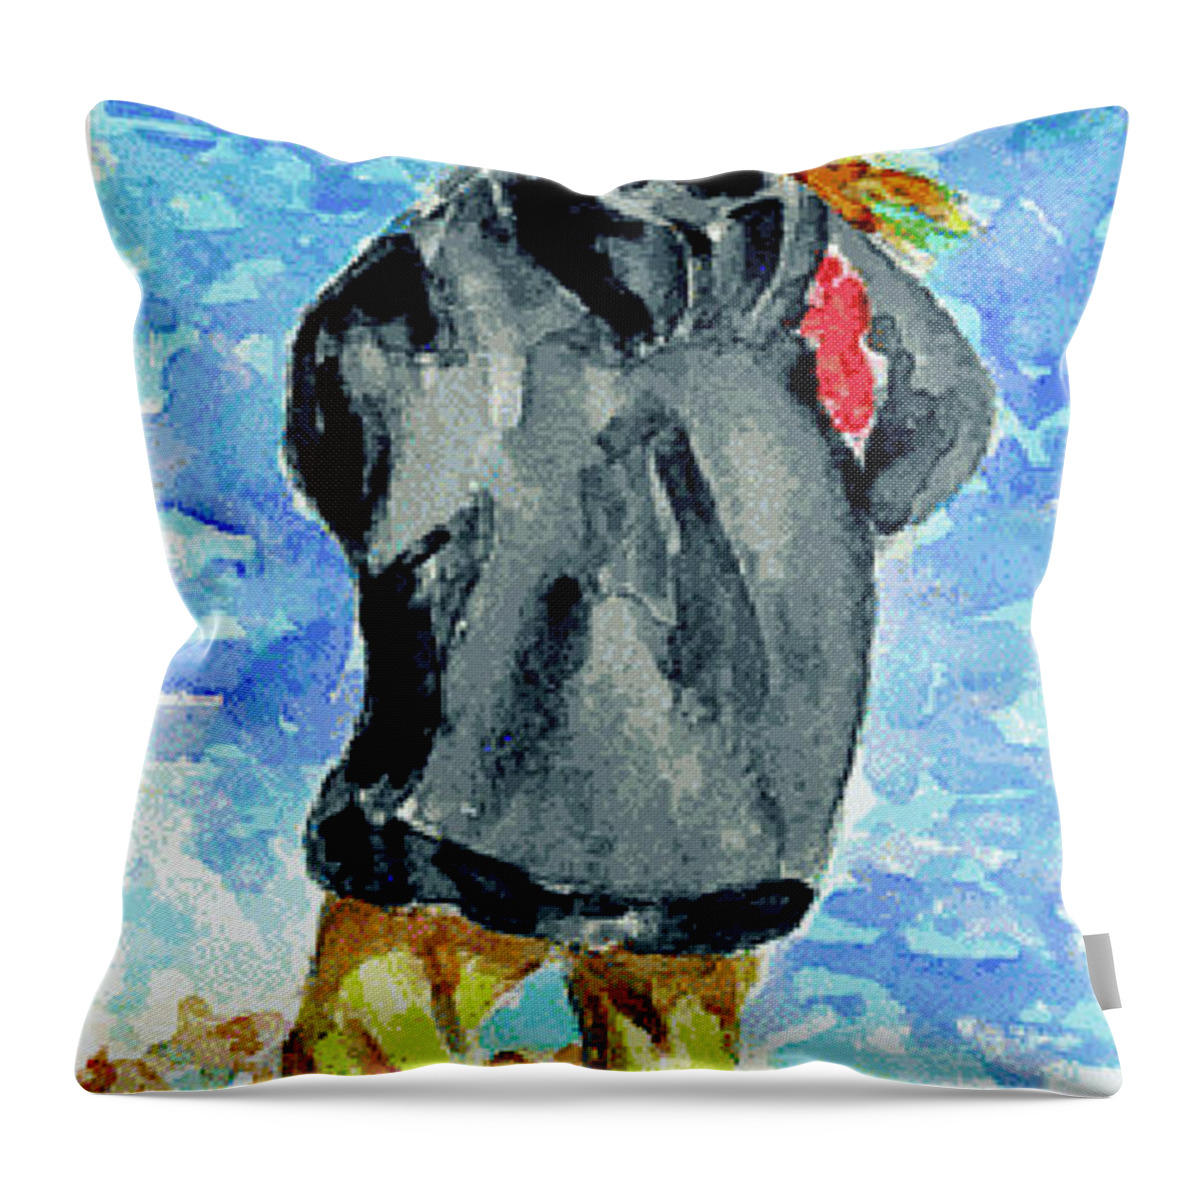 Fishing Throw Pillow featuring the painting Emelie fishing by Elaine Berger